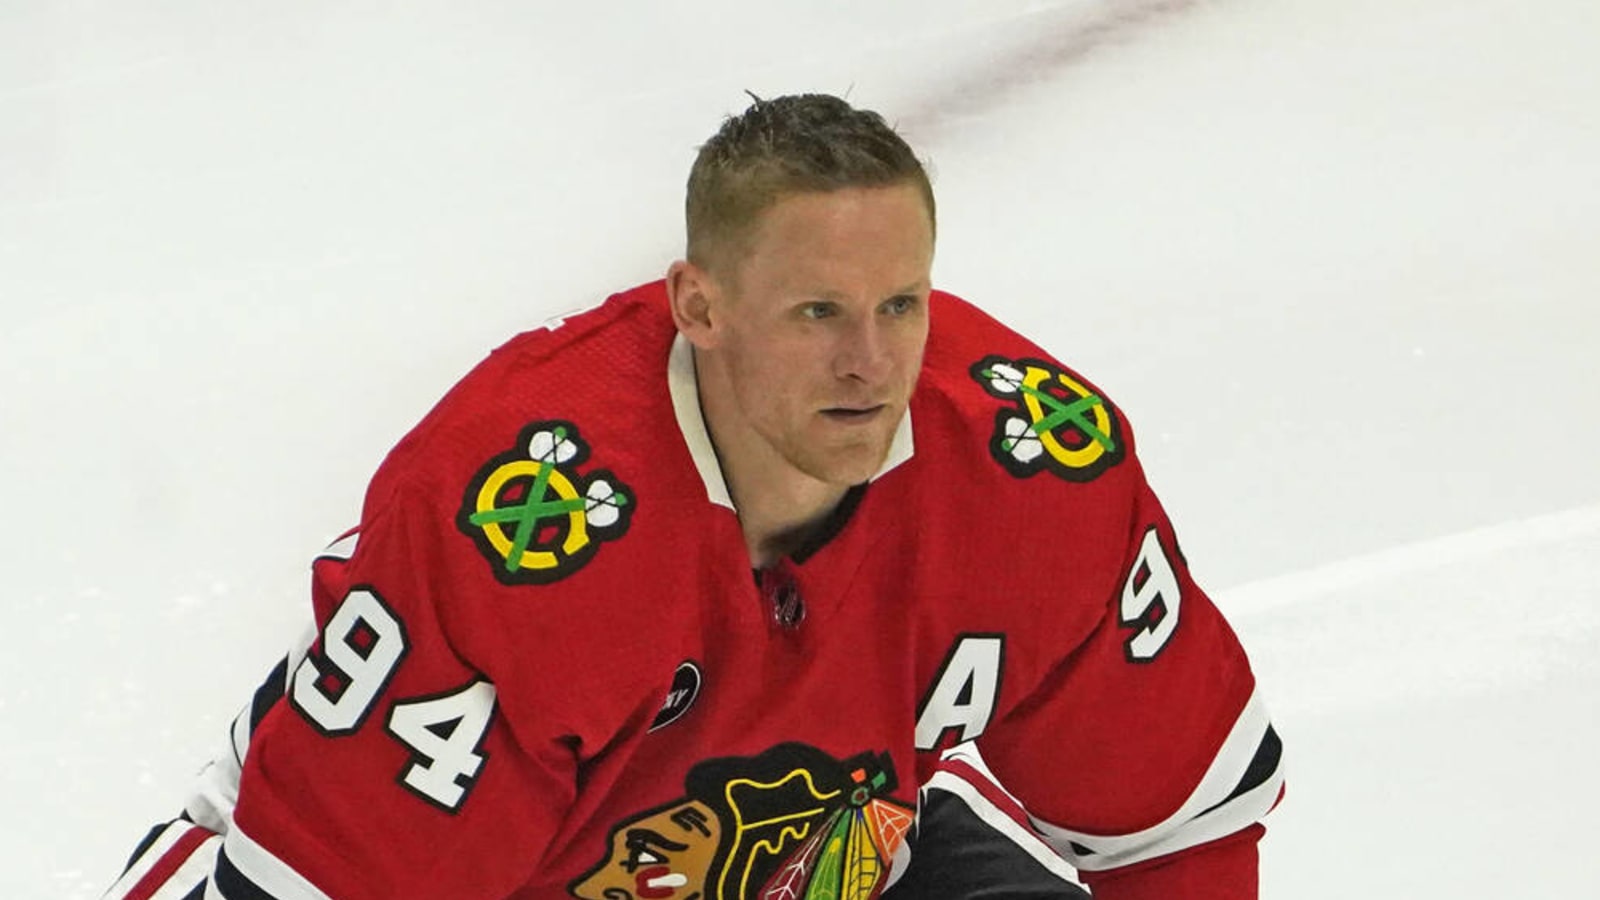 Blackhawks get it right with handling of Perry situation